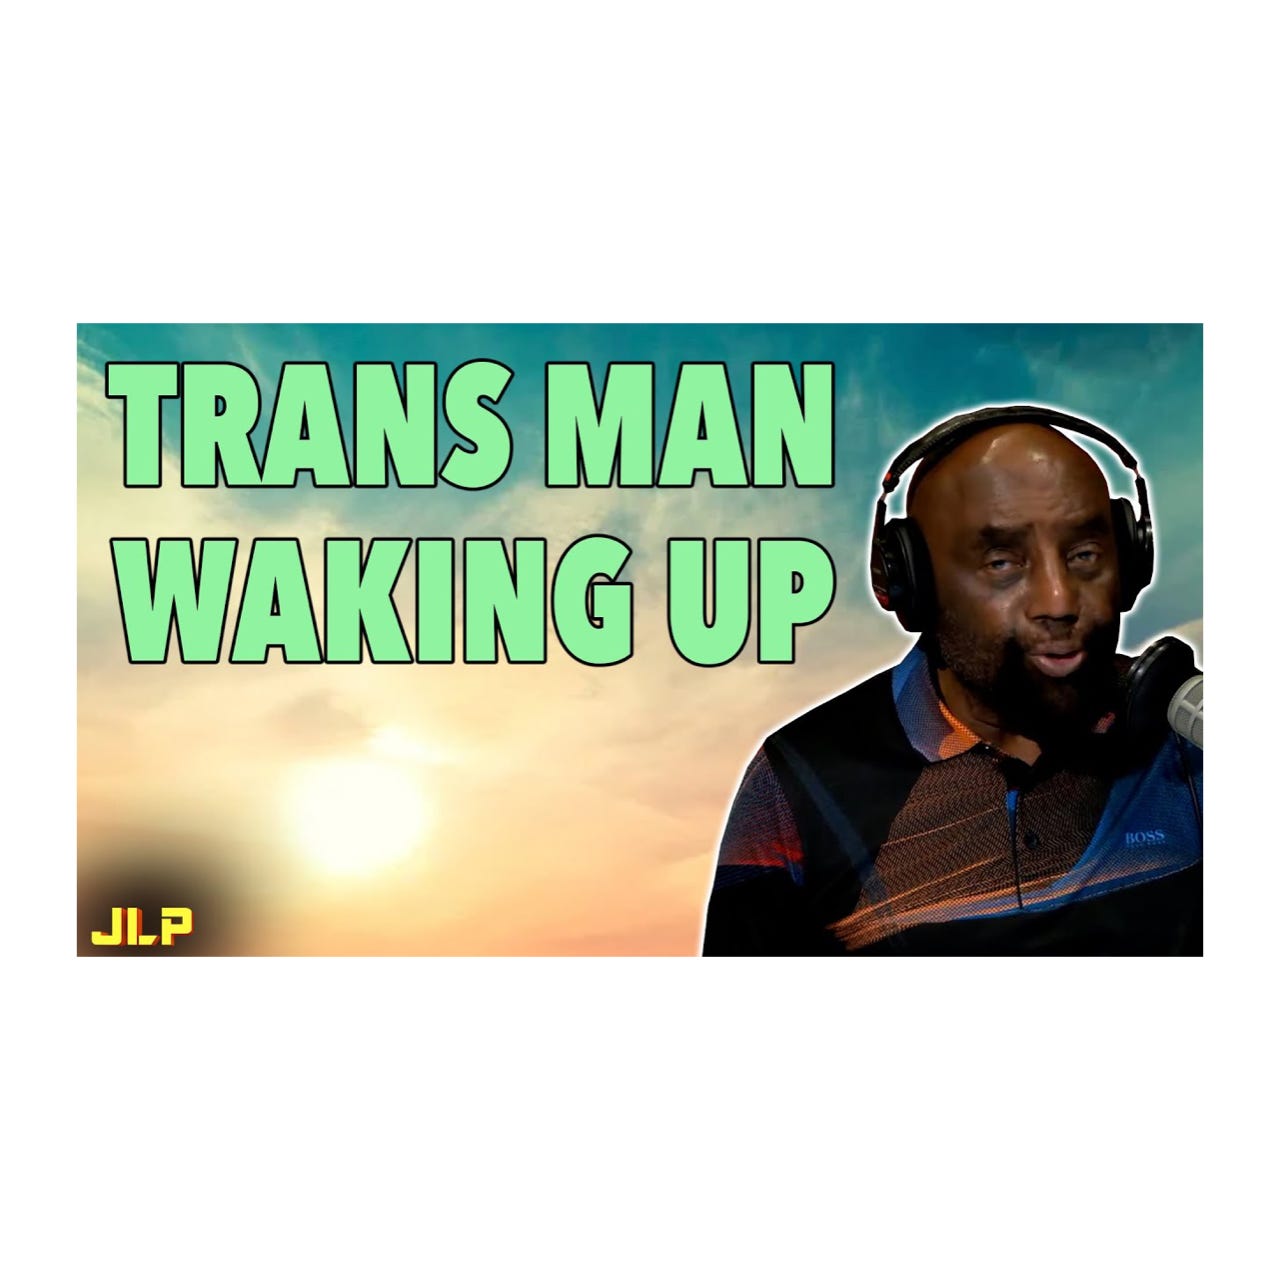 "Transgender," raised by single mother, waking up! An AMAZIN' CALL | JLP